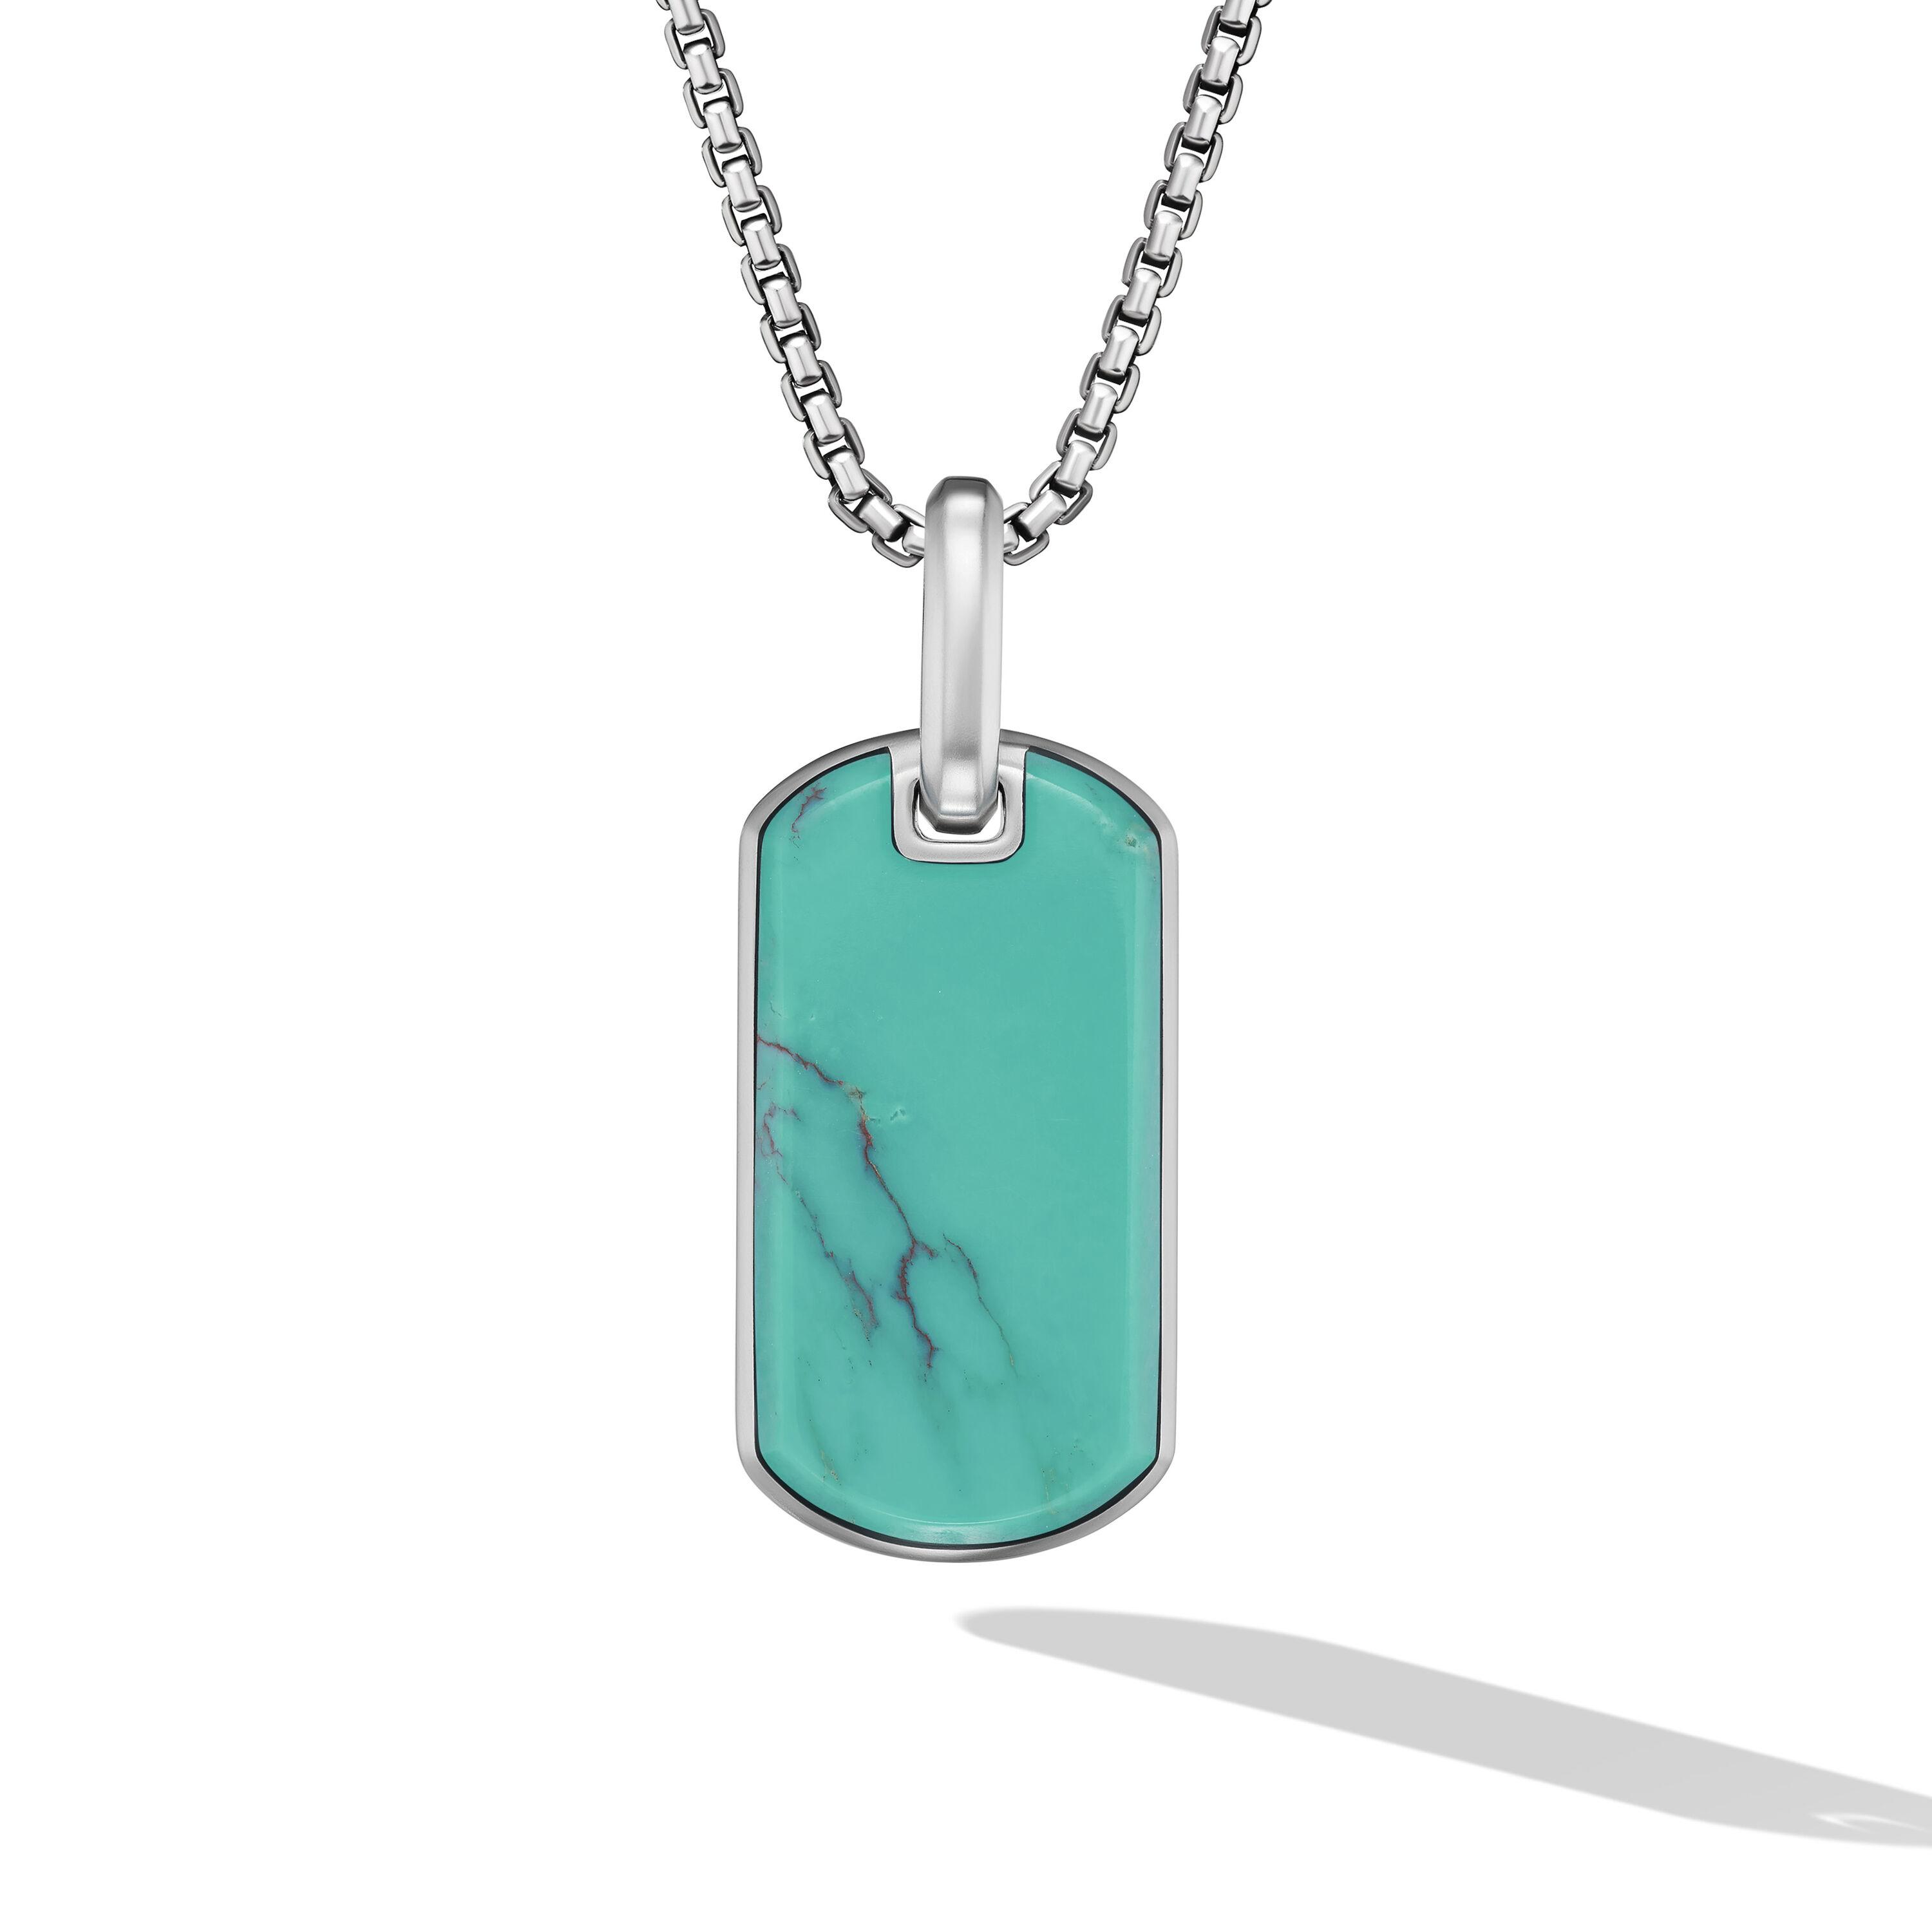 David Yurman 27mm Chevron Tag in Sterling Silver with Turquoise